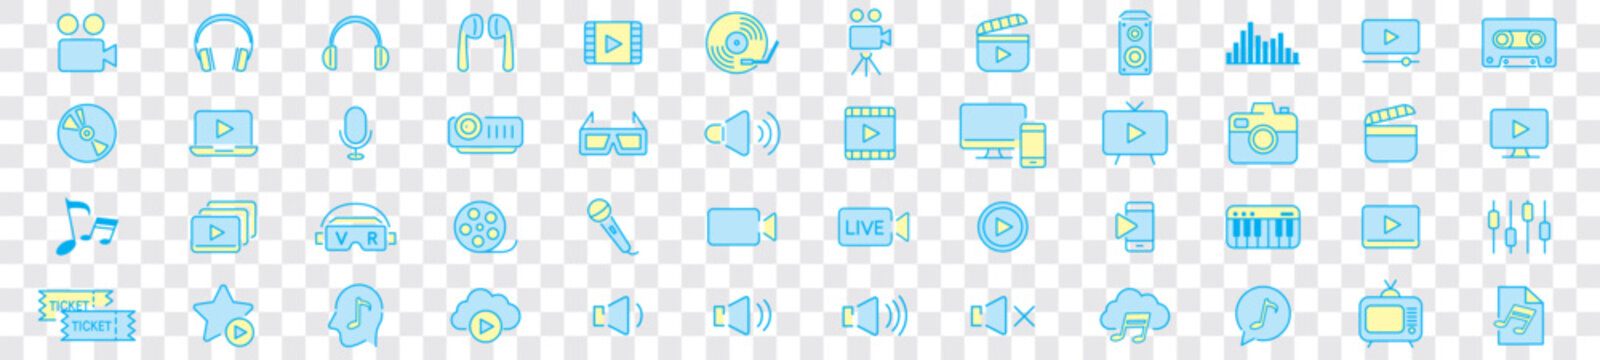 Video line icon set. camera, movie, video, music, cinema, audio, play, pause, media, content, live, production, player, collection vector